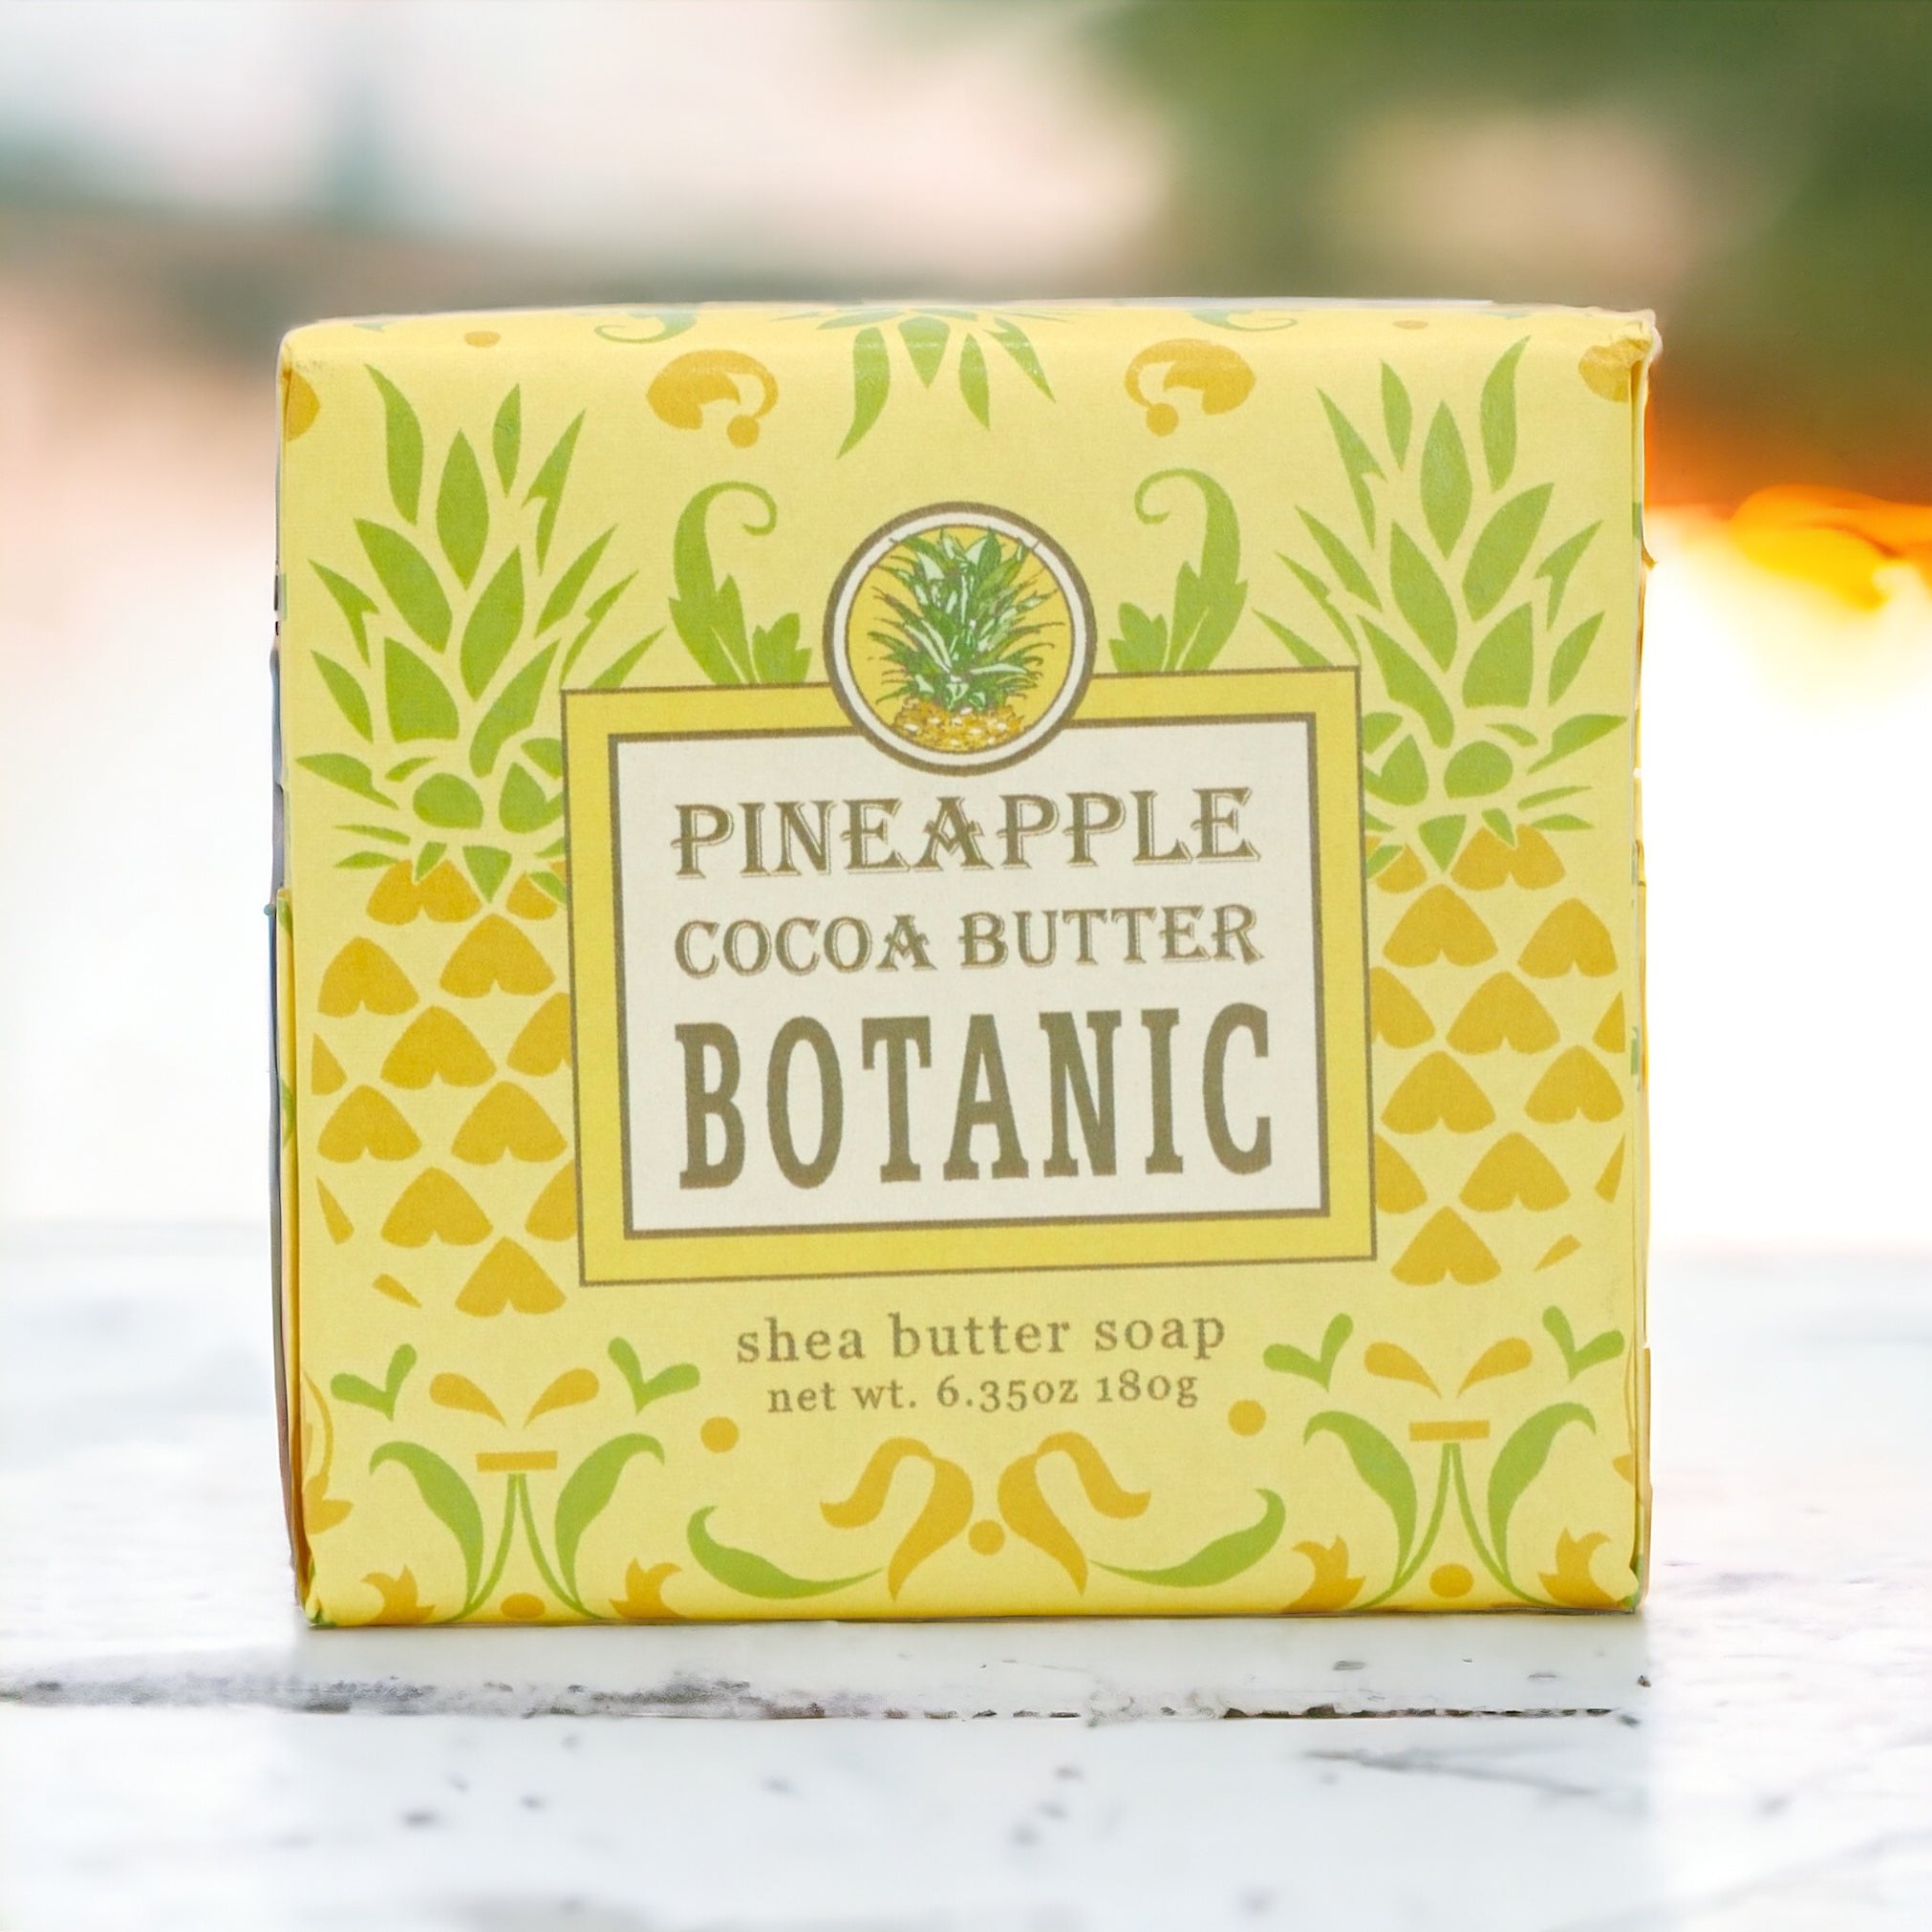 Pineapple Cocoa Butter Botanic Shea Butter Soap by Greenwich Bay Trading Co.